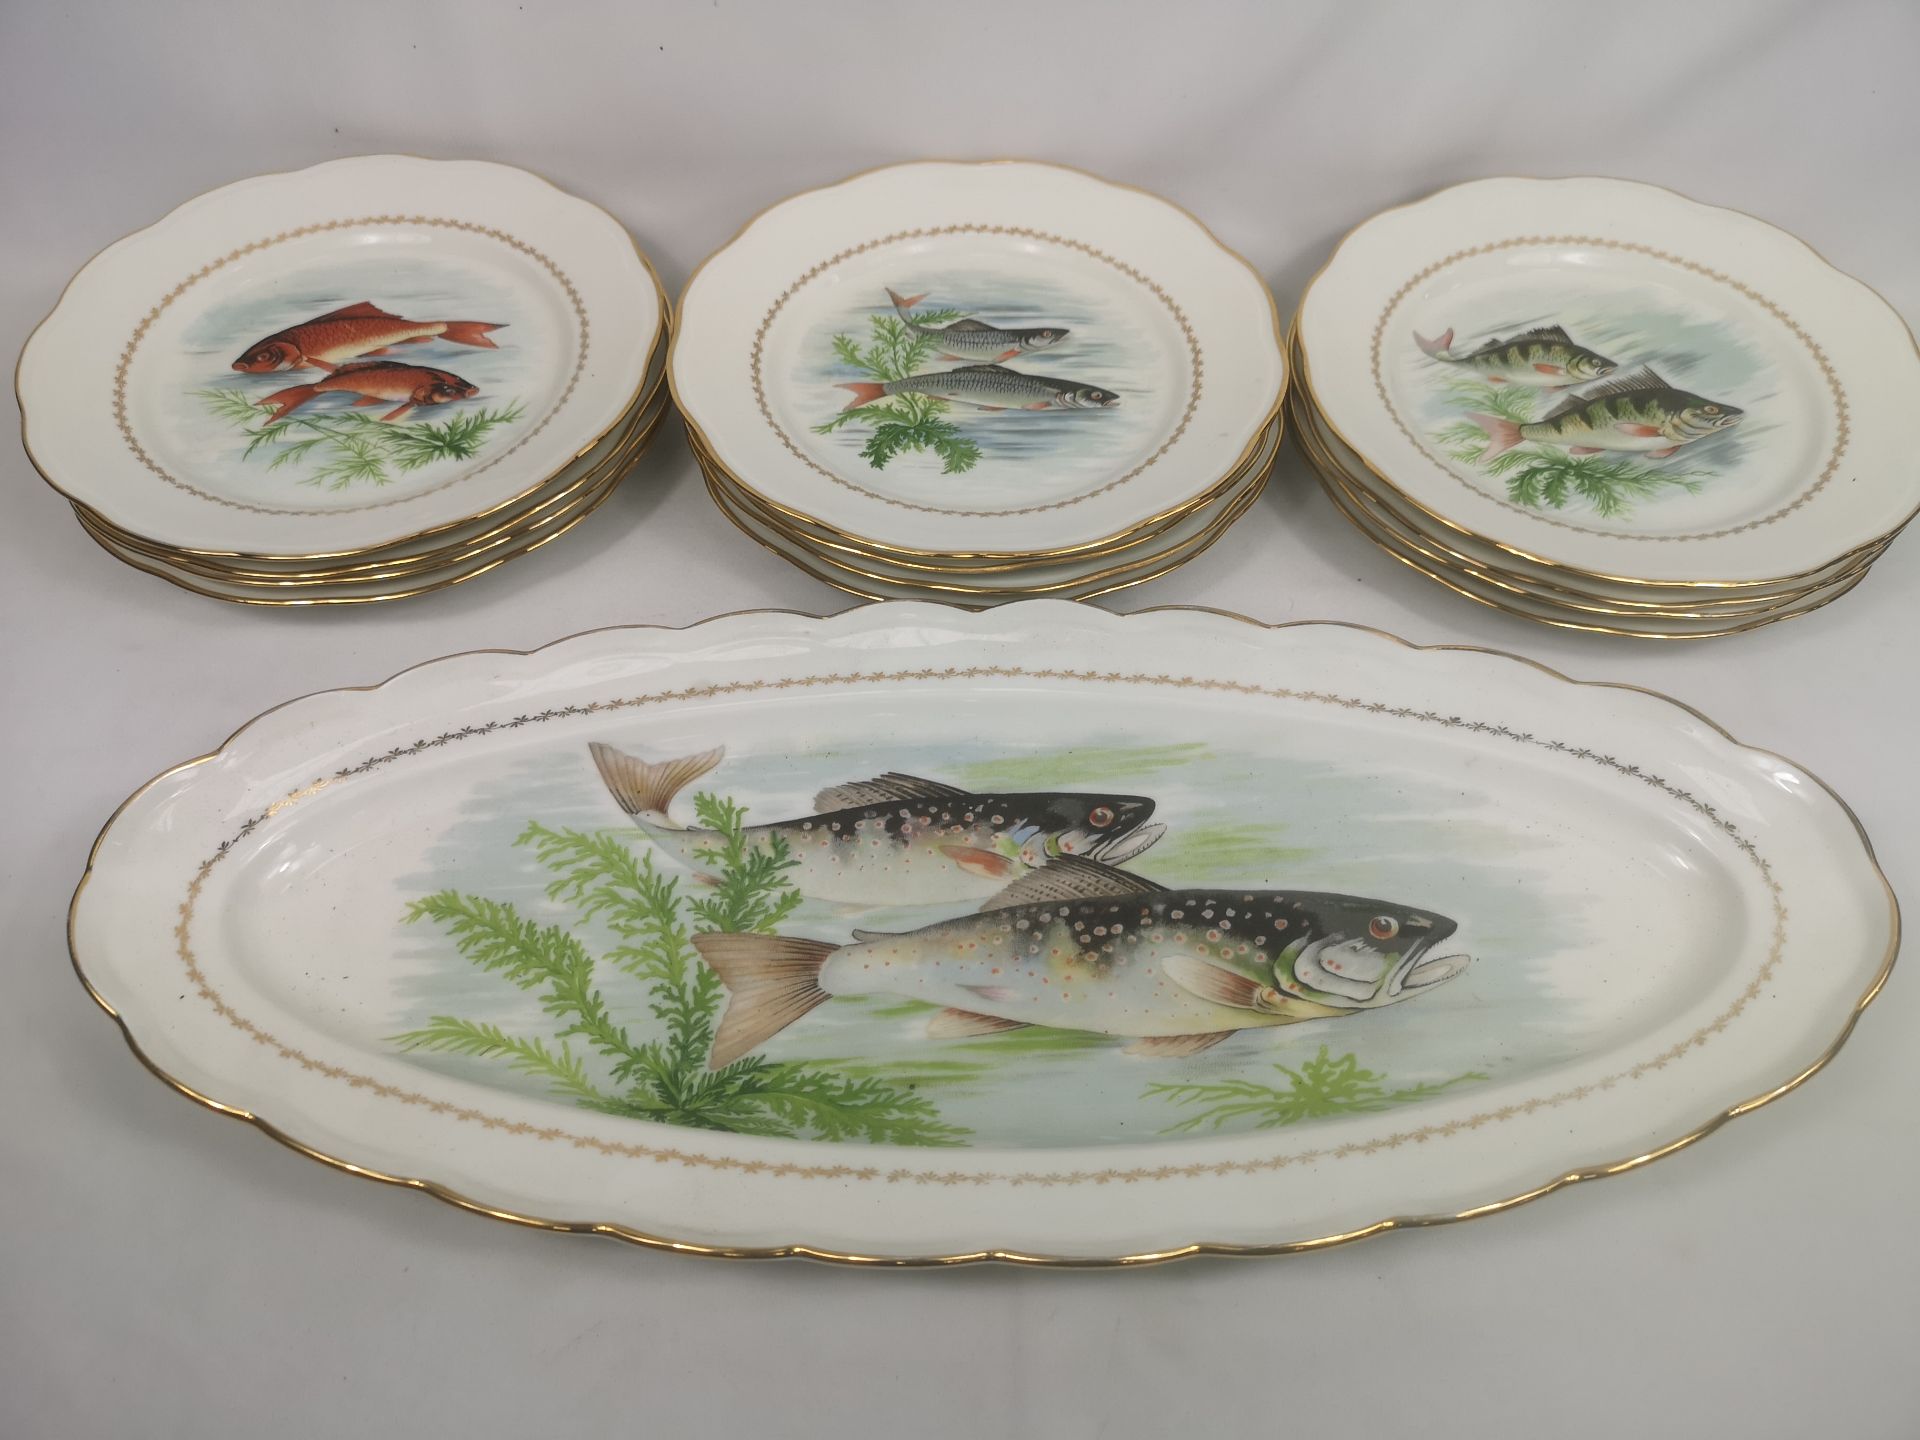 Six hand painted plates